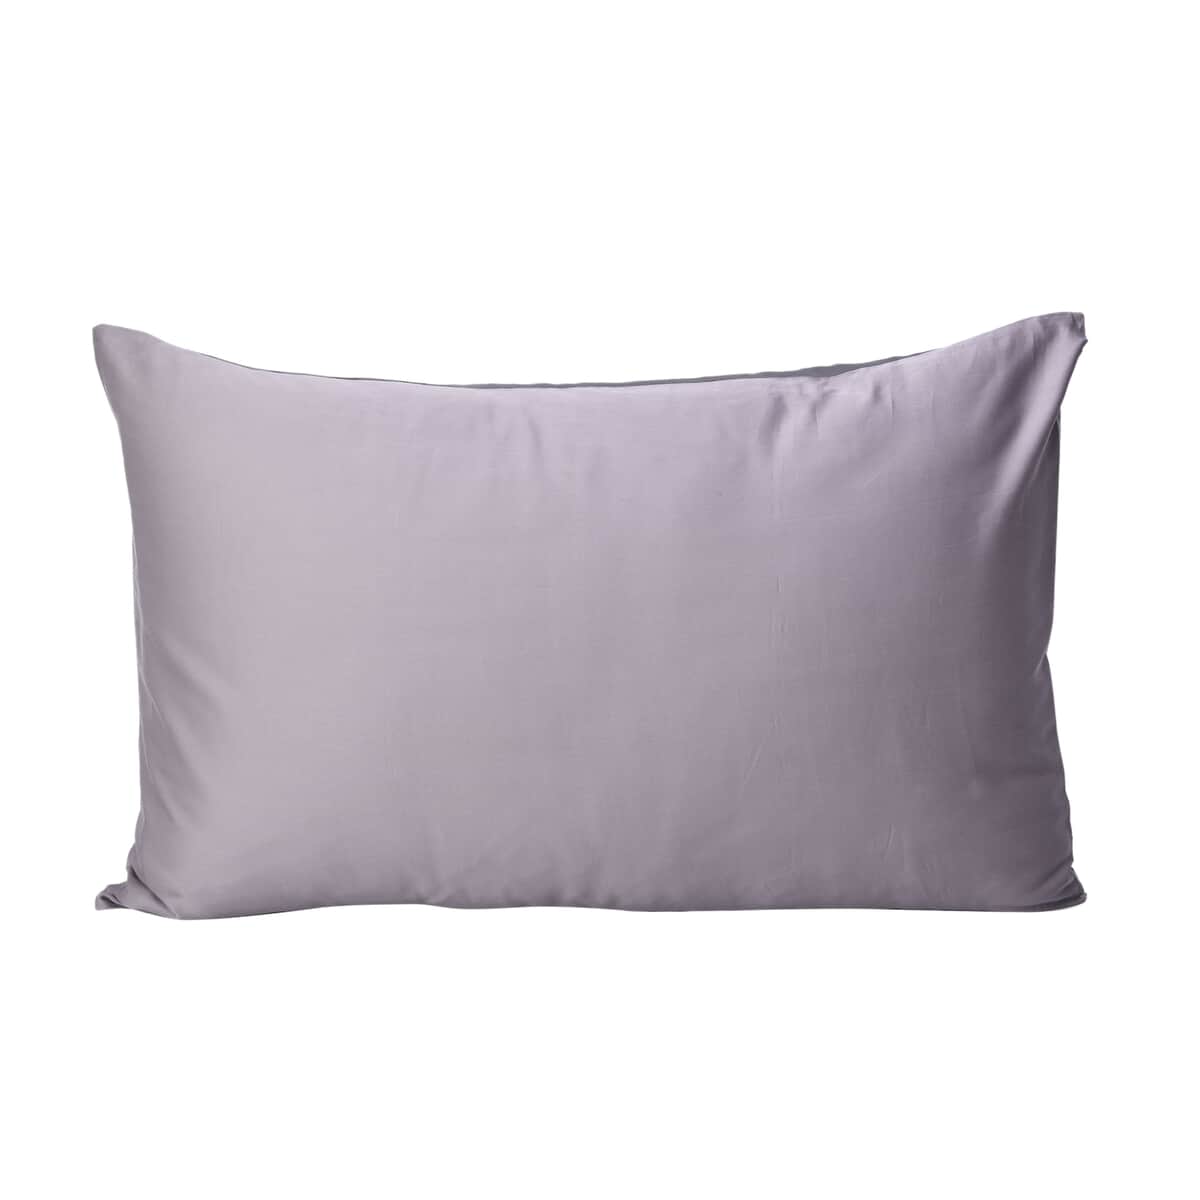 Symphony Home Gray 100% Mulberry Silk Pillowcase Infused with Hyaluronic Acid & Argan Oil - King, Pillow Protectors, Pillow Cover, Cushion Cover, Pillow Shams, Pillow Case Covers image number 3